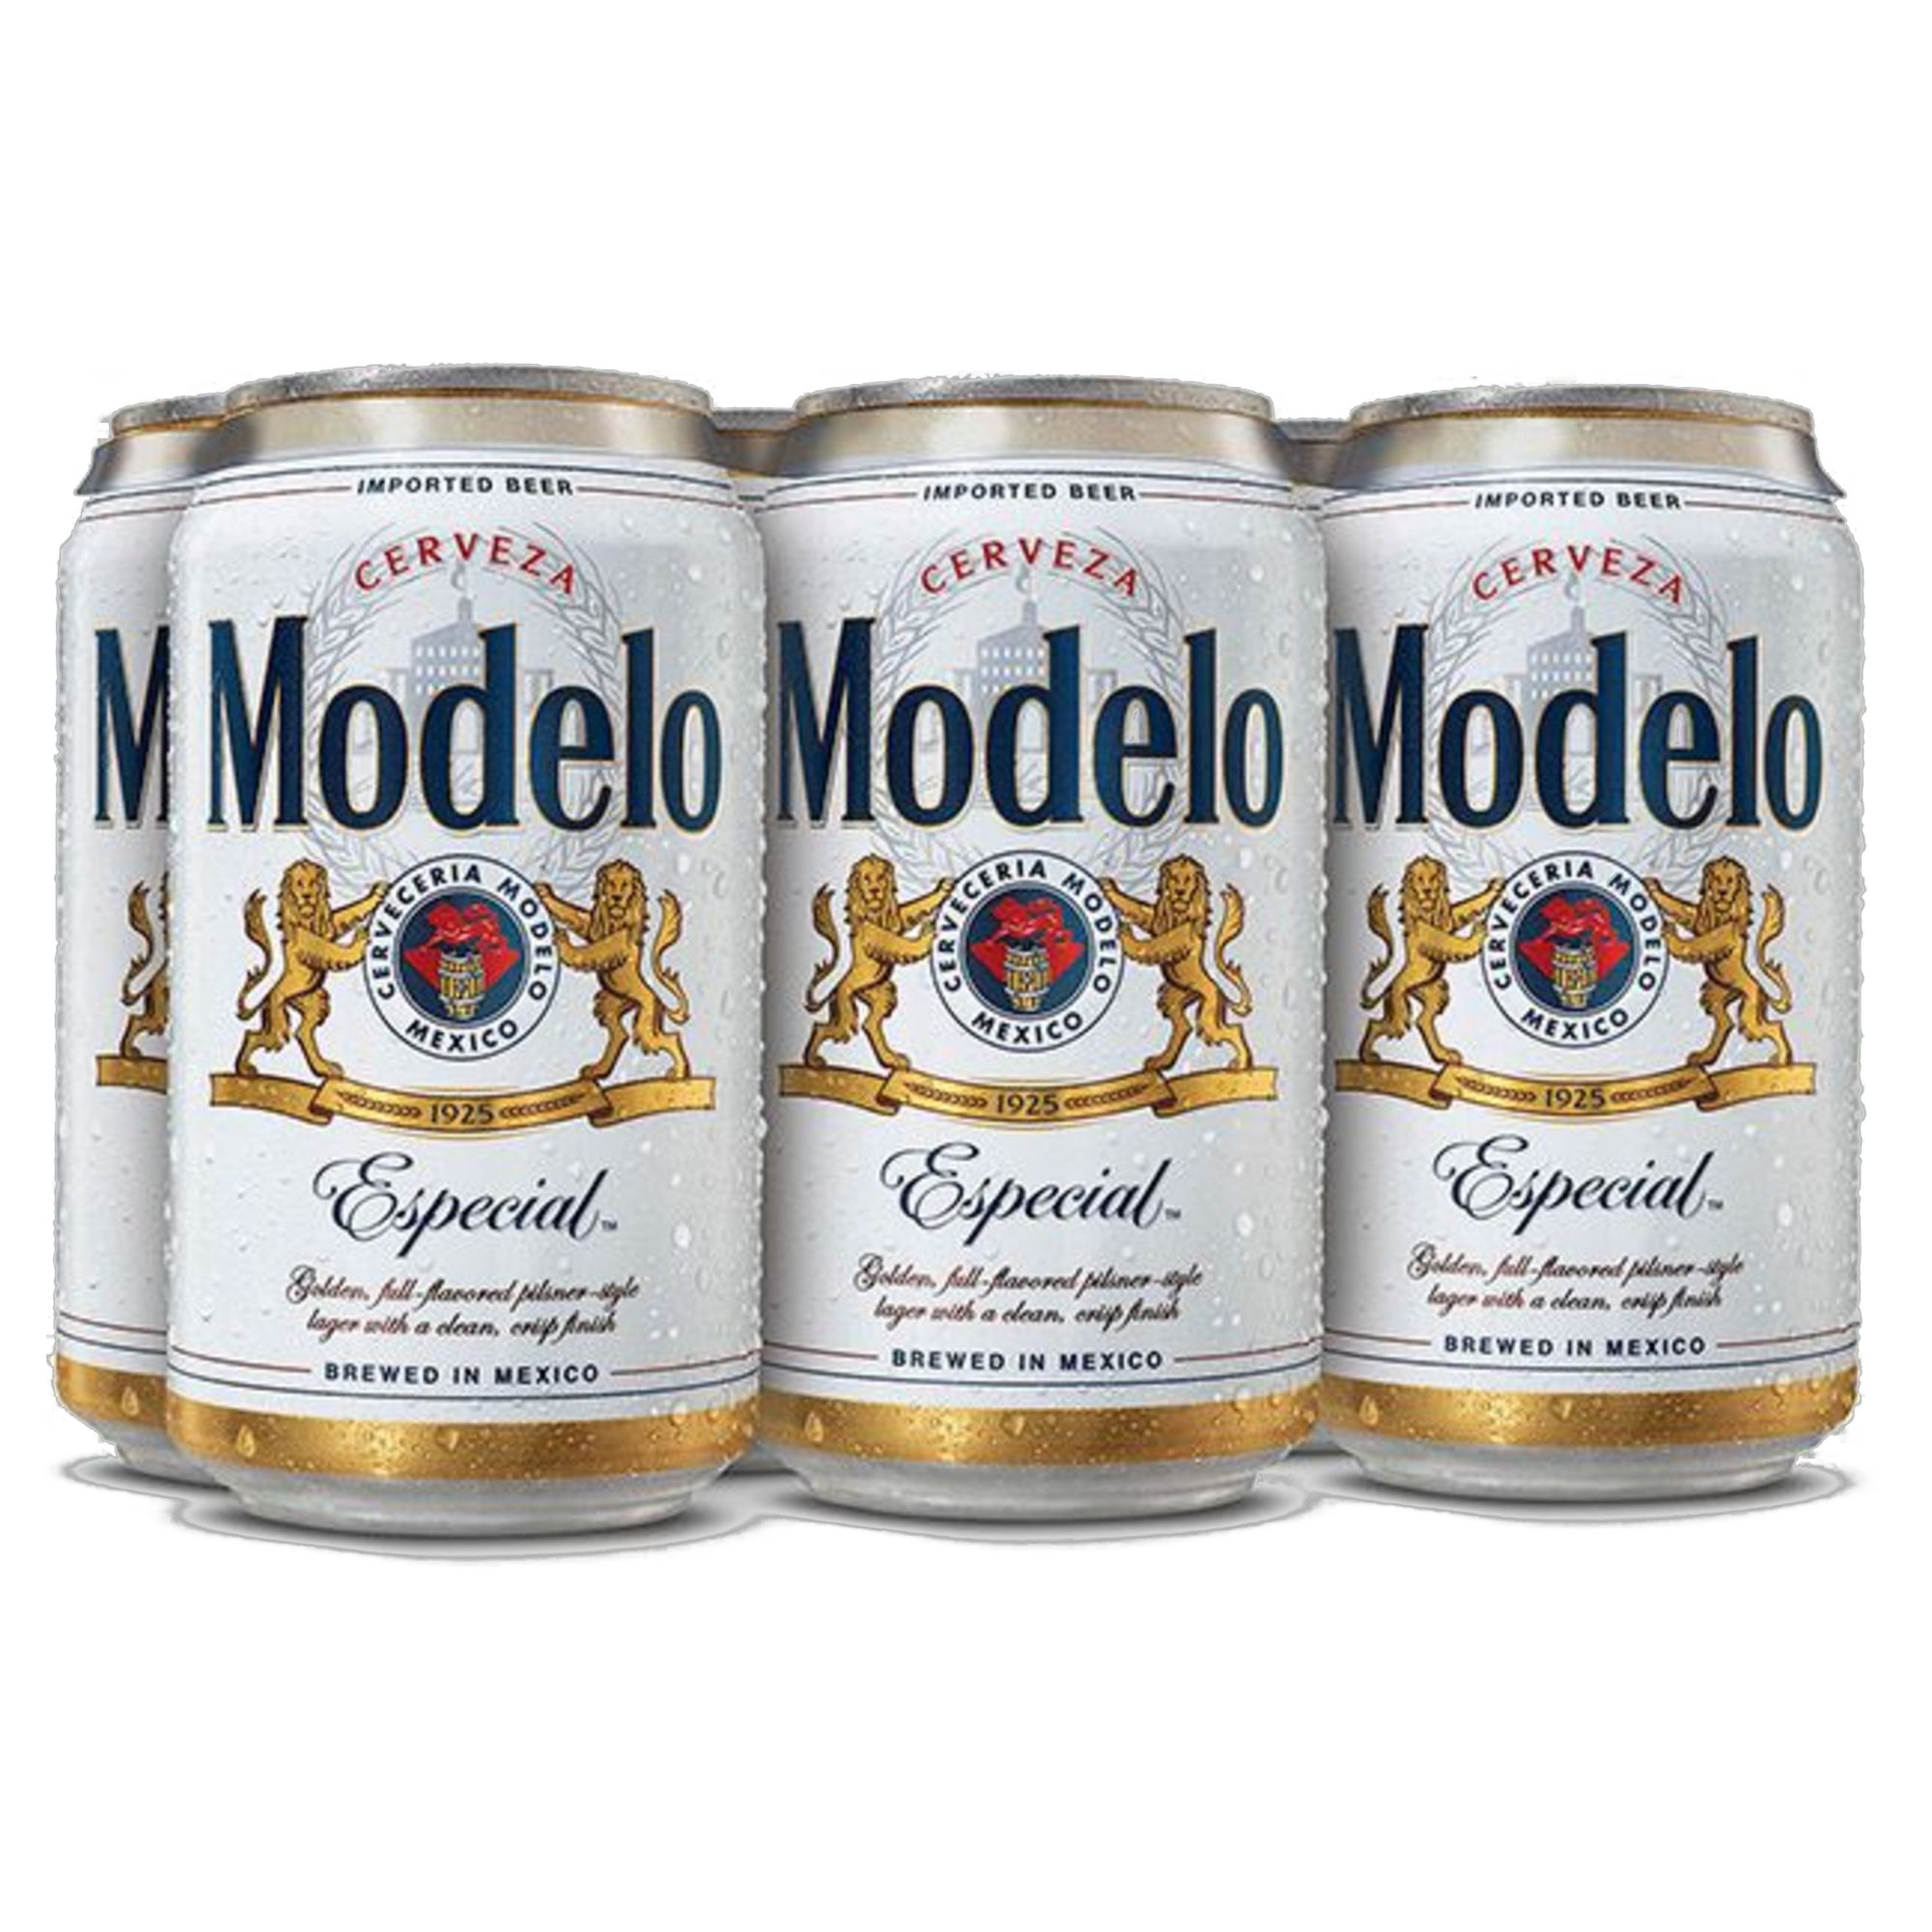 Modelo Especial Mexican Lager Beer 12 oz Cans - Shop Beer at H-E-B